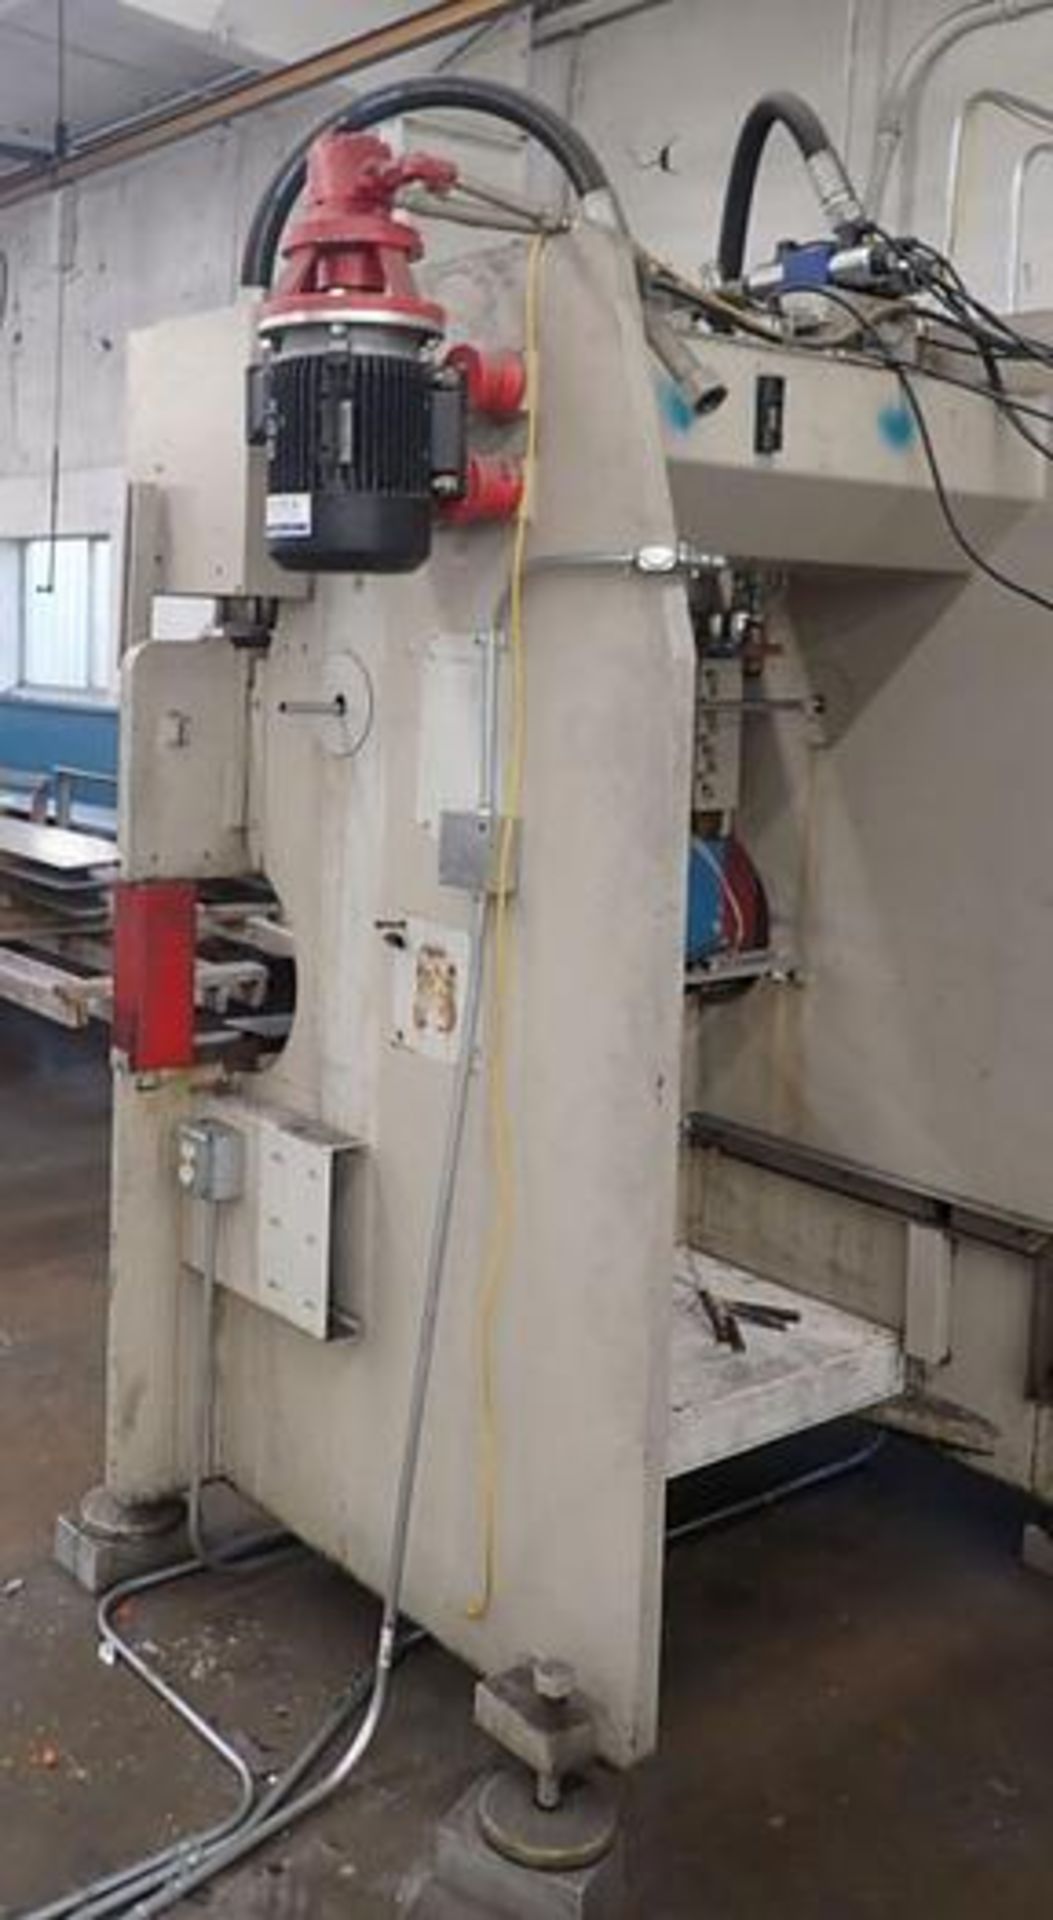 HYDRAULIC PRESS BRAKE, HACO MDL. PPES45-5BC25, 45 T. cap. x 5', BC25 control, needs repair; - Image 3 of 5